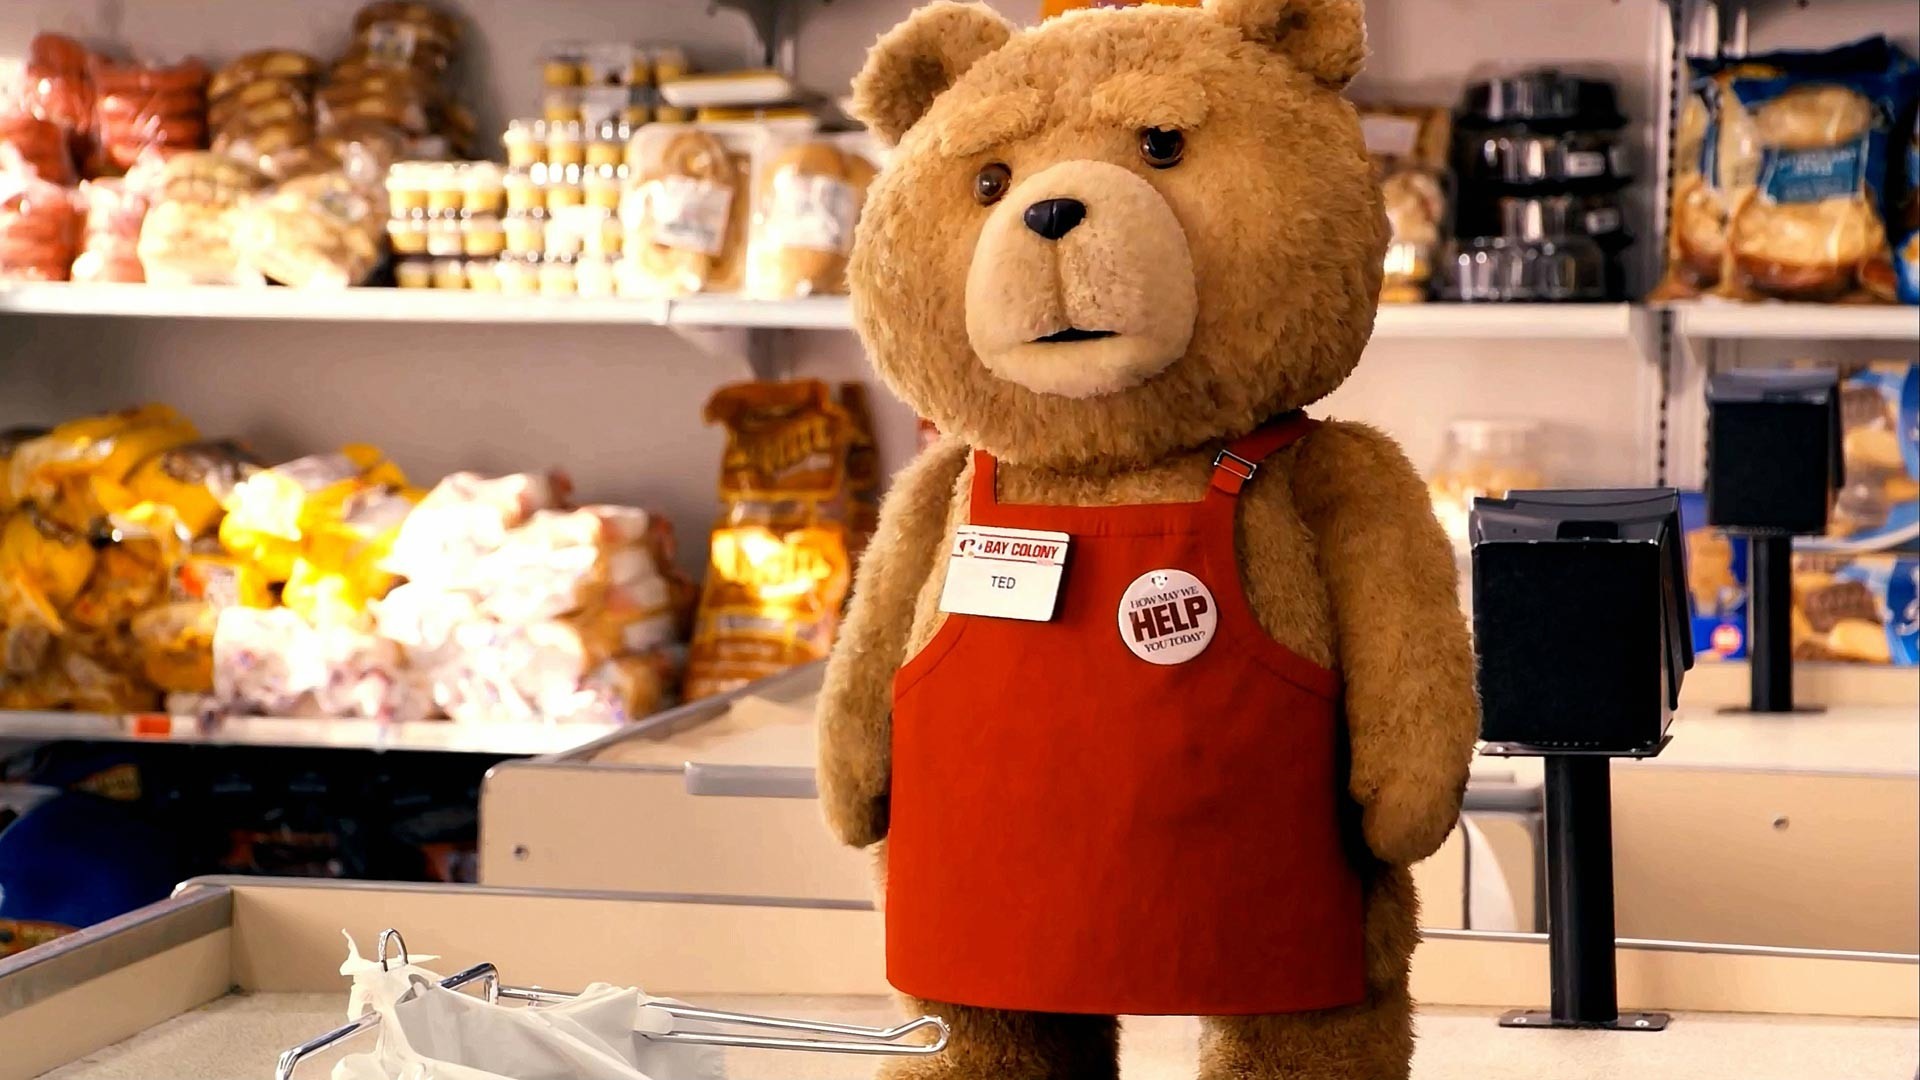 Ted 2012 HD movie wallpapers #14 - 1920x1080